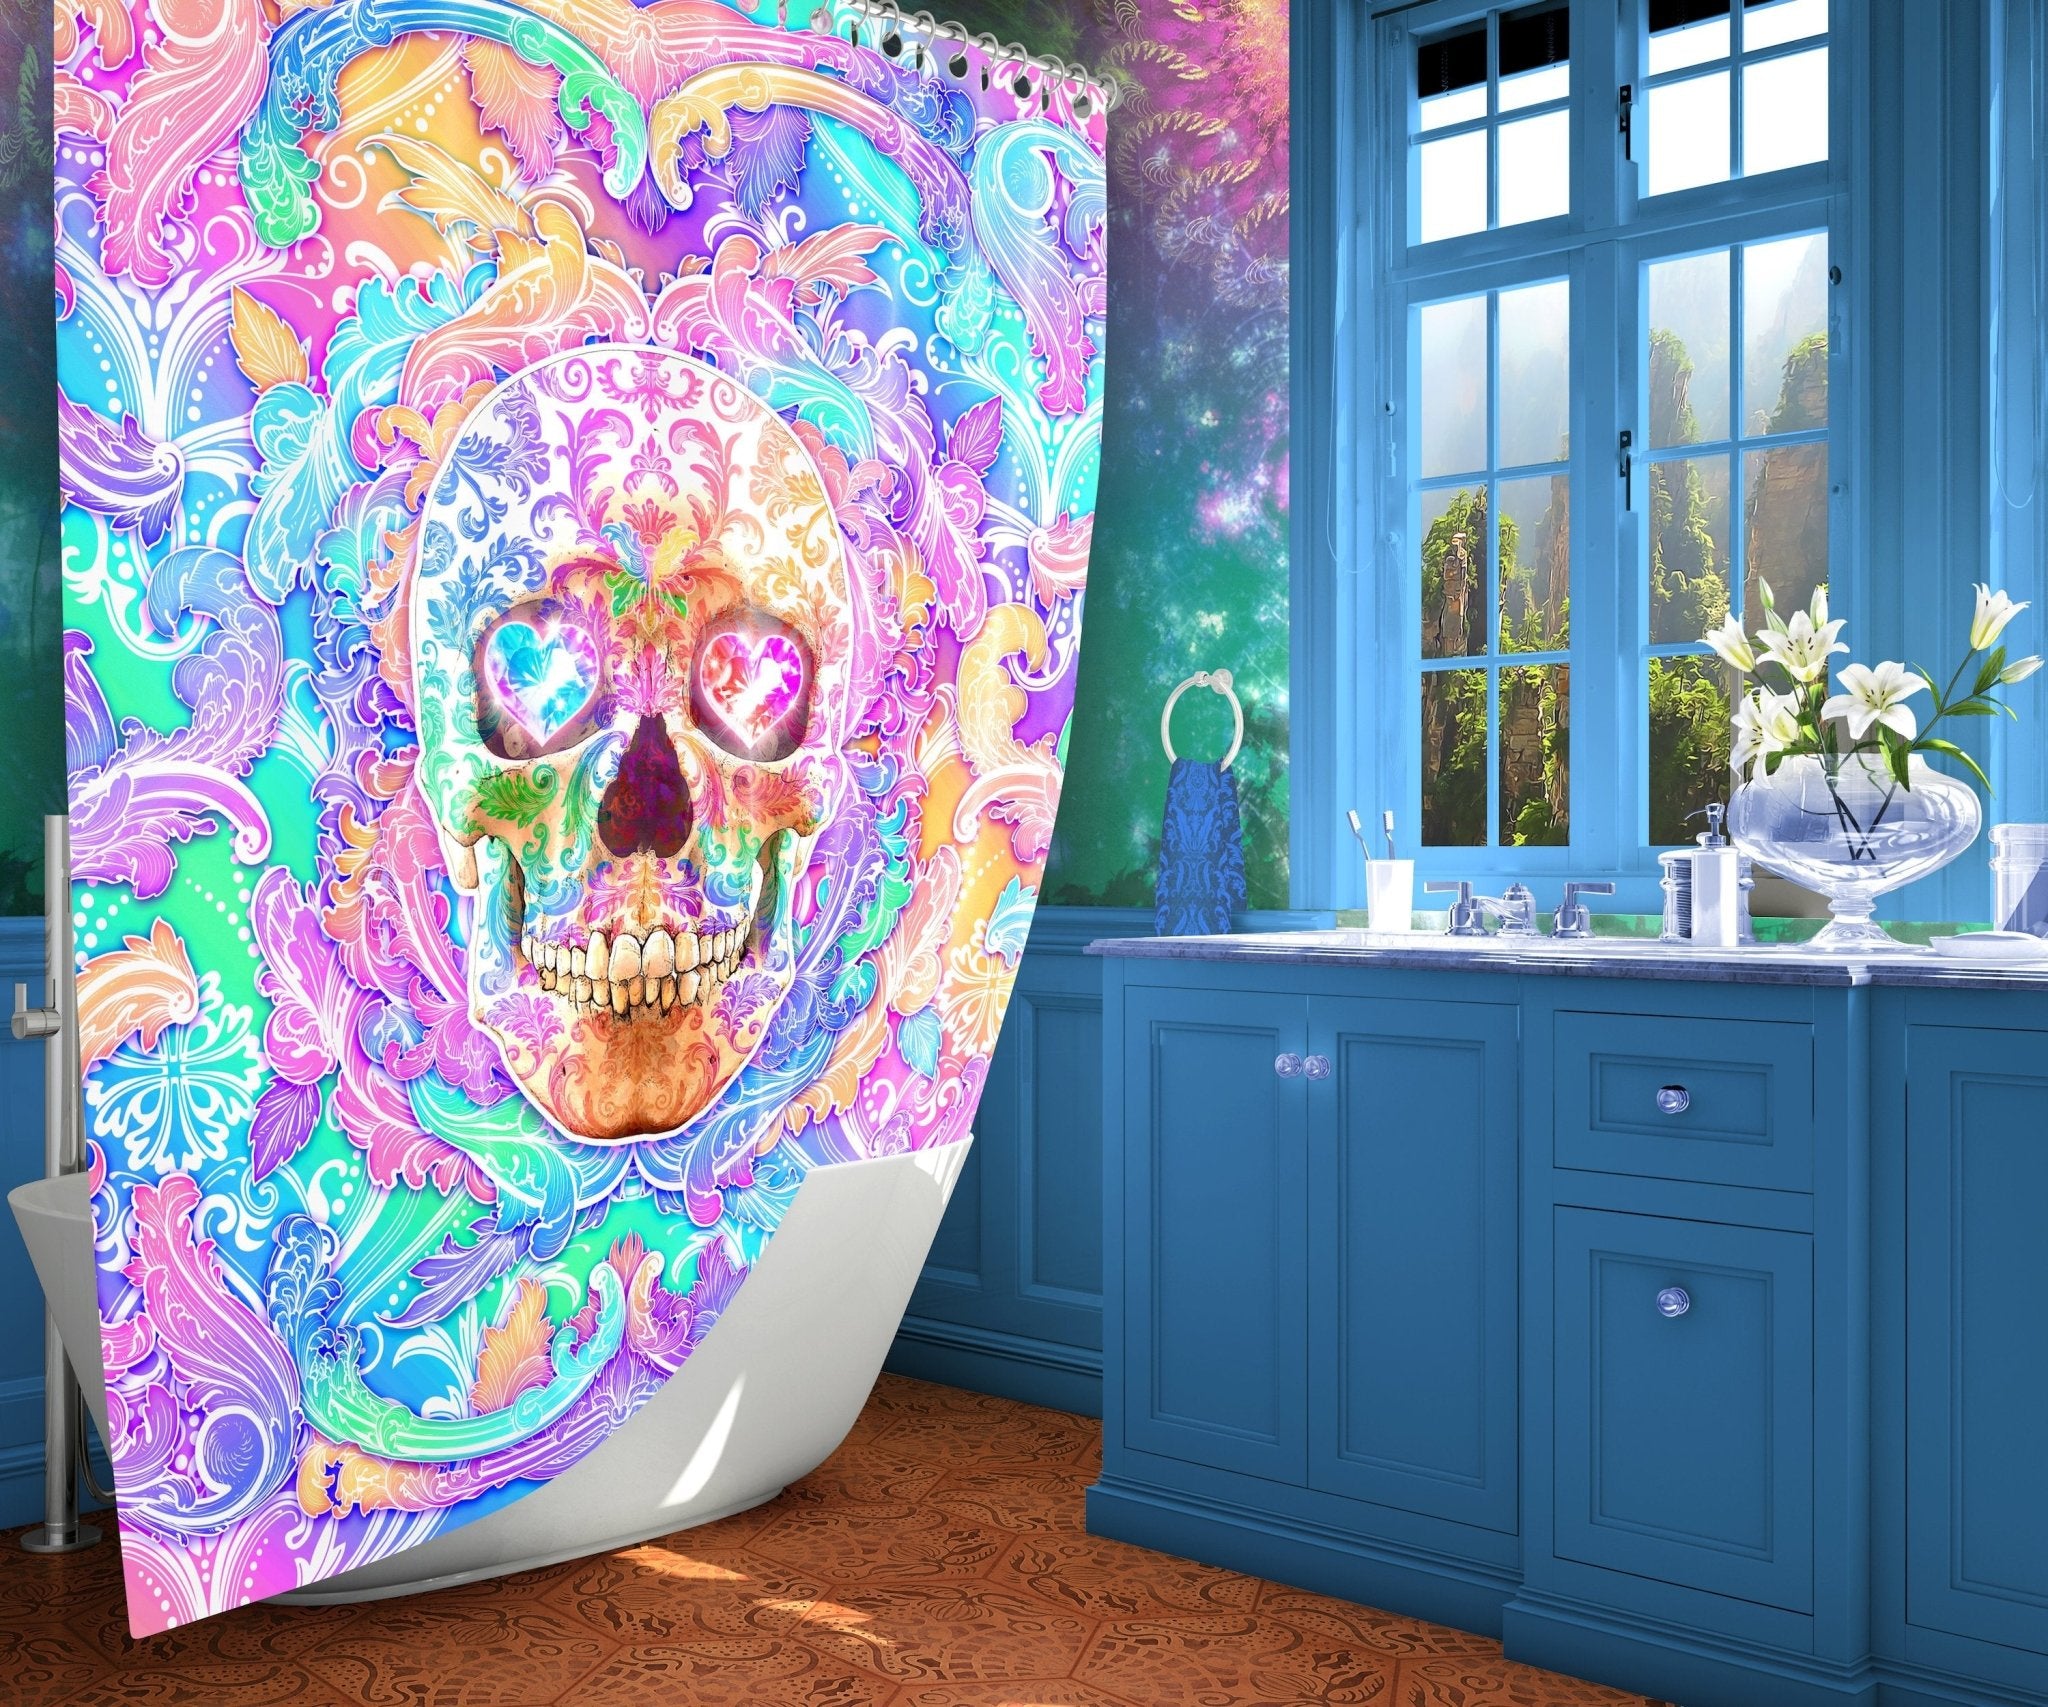 Psychedelic Shower Curtain, Aesthetic Skull, Holographic Bathroom Decor, Eclectic and Funky Home - Macabre Pastel Art - Abysm Internal